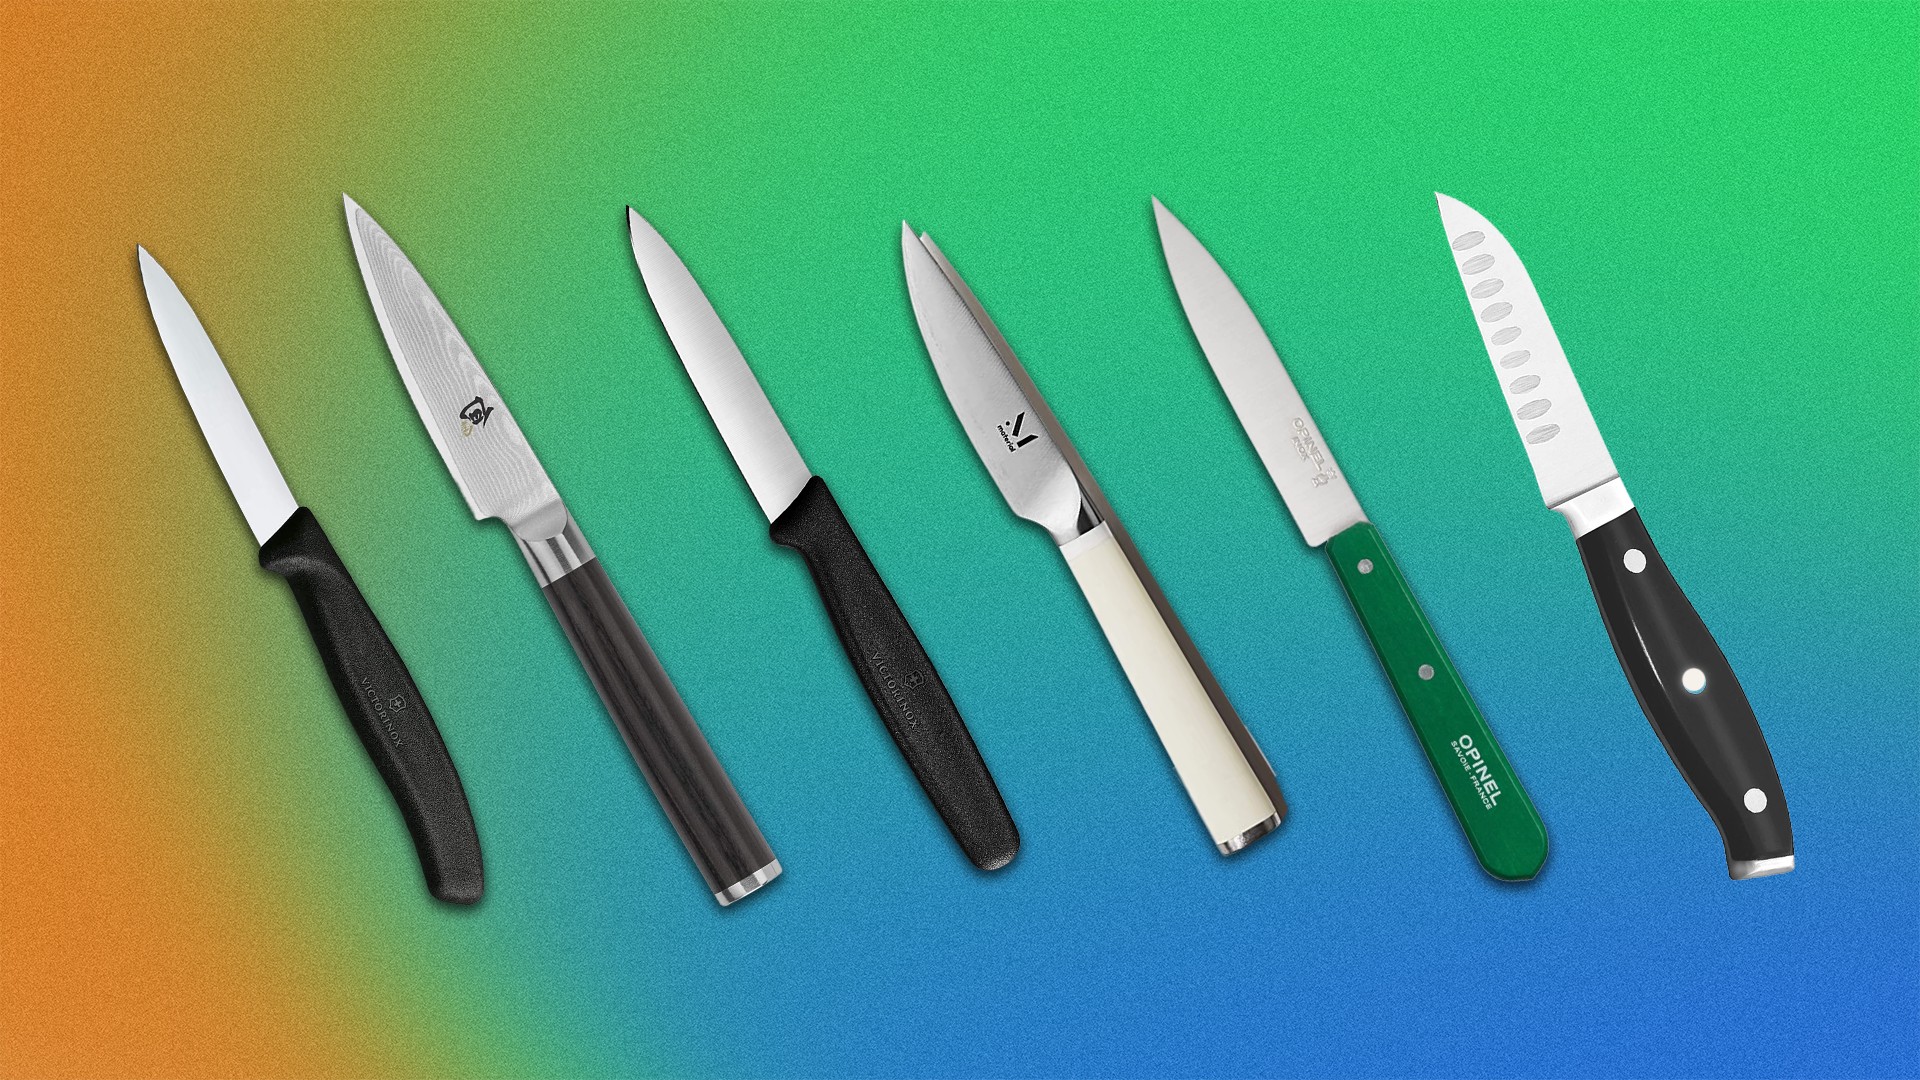 Best Chef's Knife Under $100 (Top 6 Compared) - Prudent Reviews